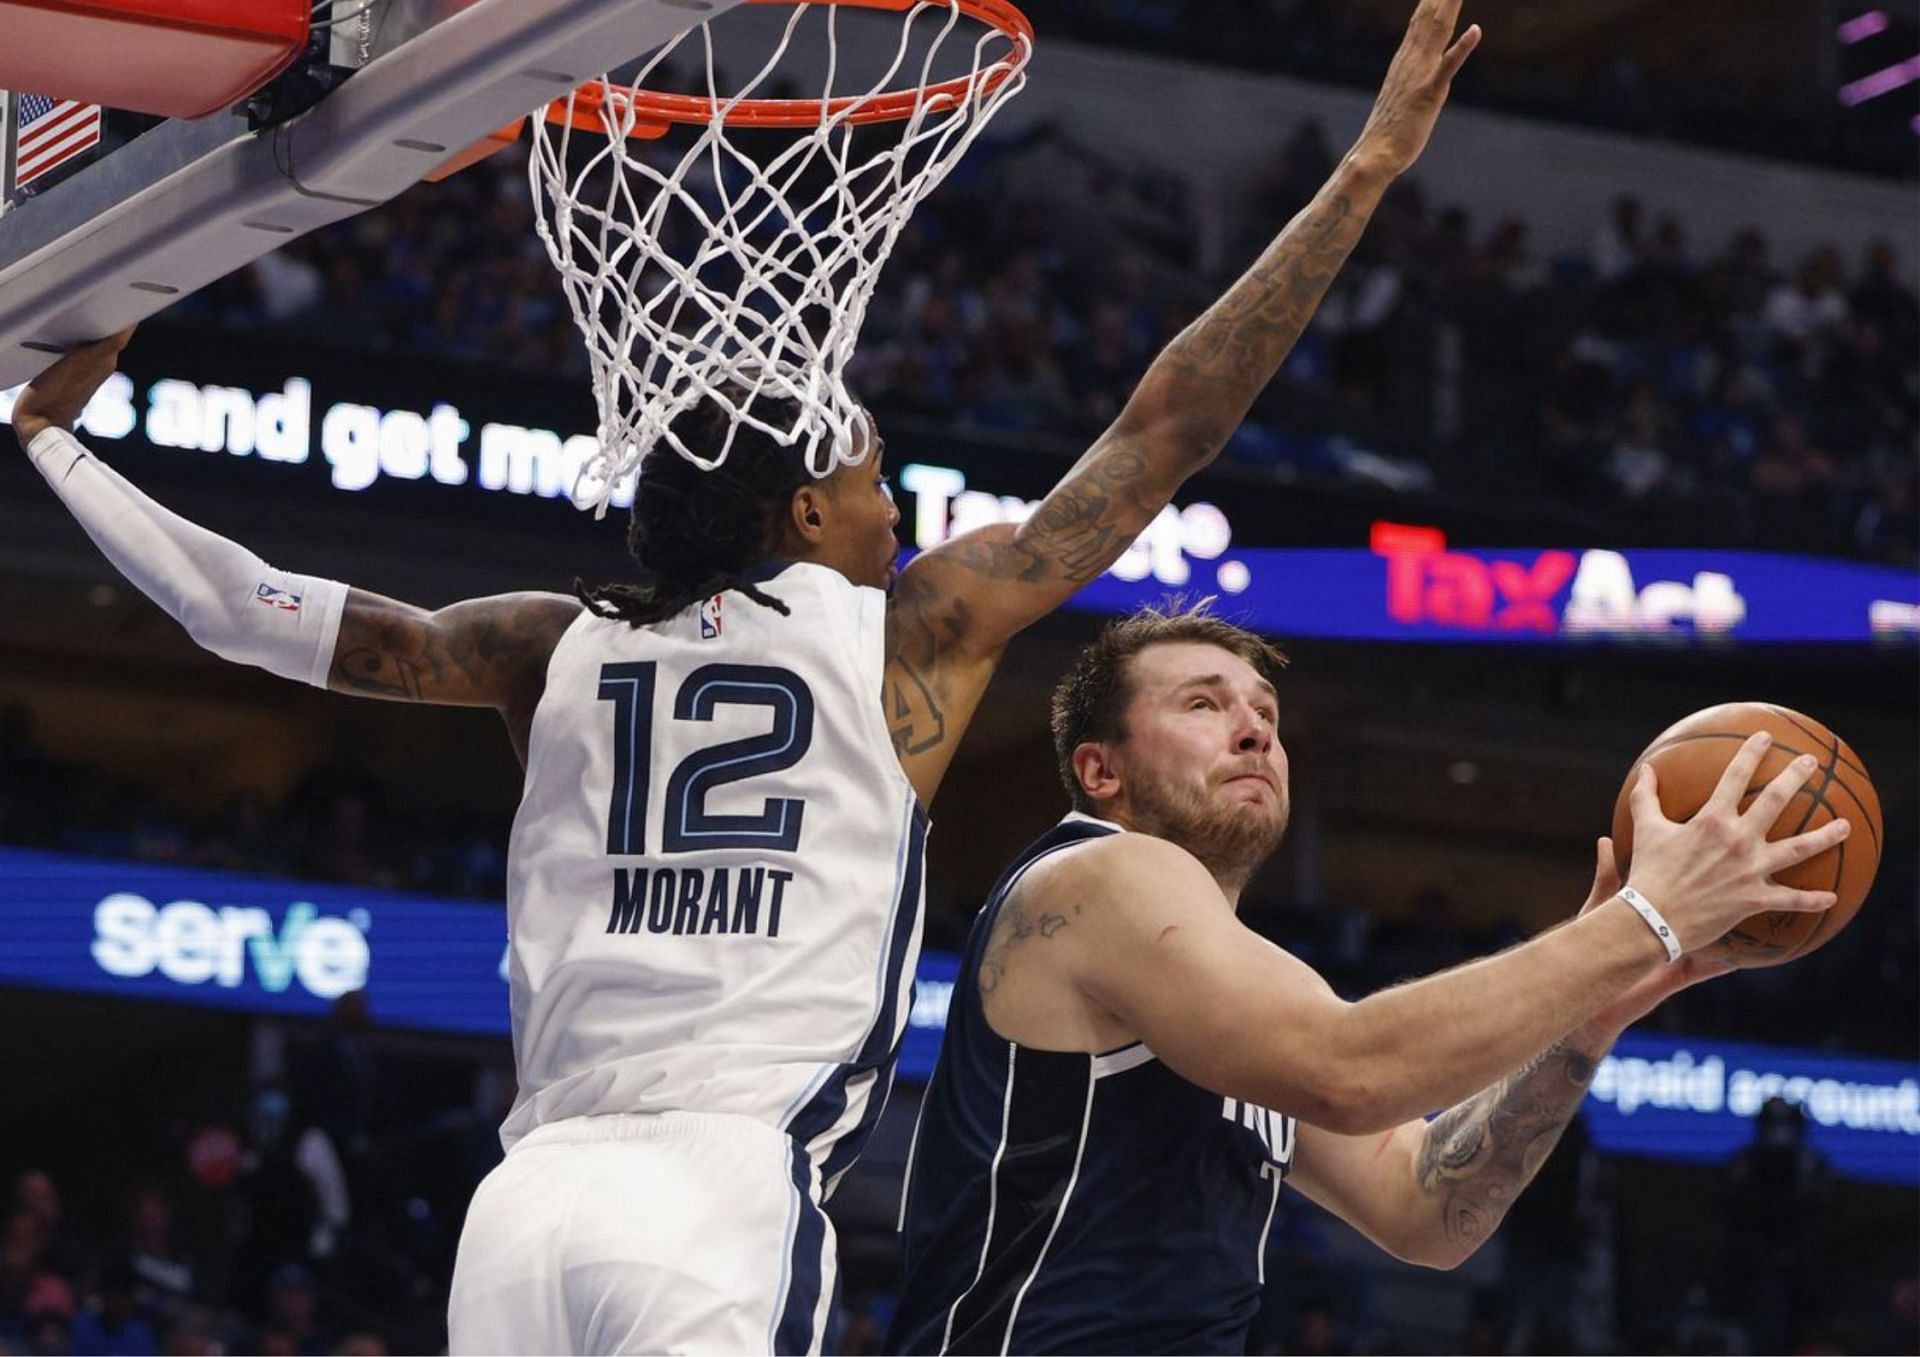 Luka Doncic is hoping to play tonight against the Memphis Grizzlies. [photo: Dallas Morning News]